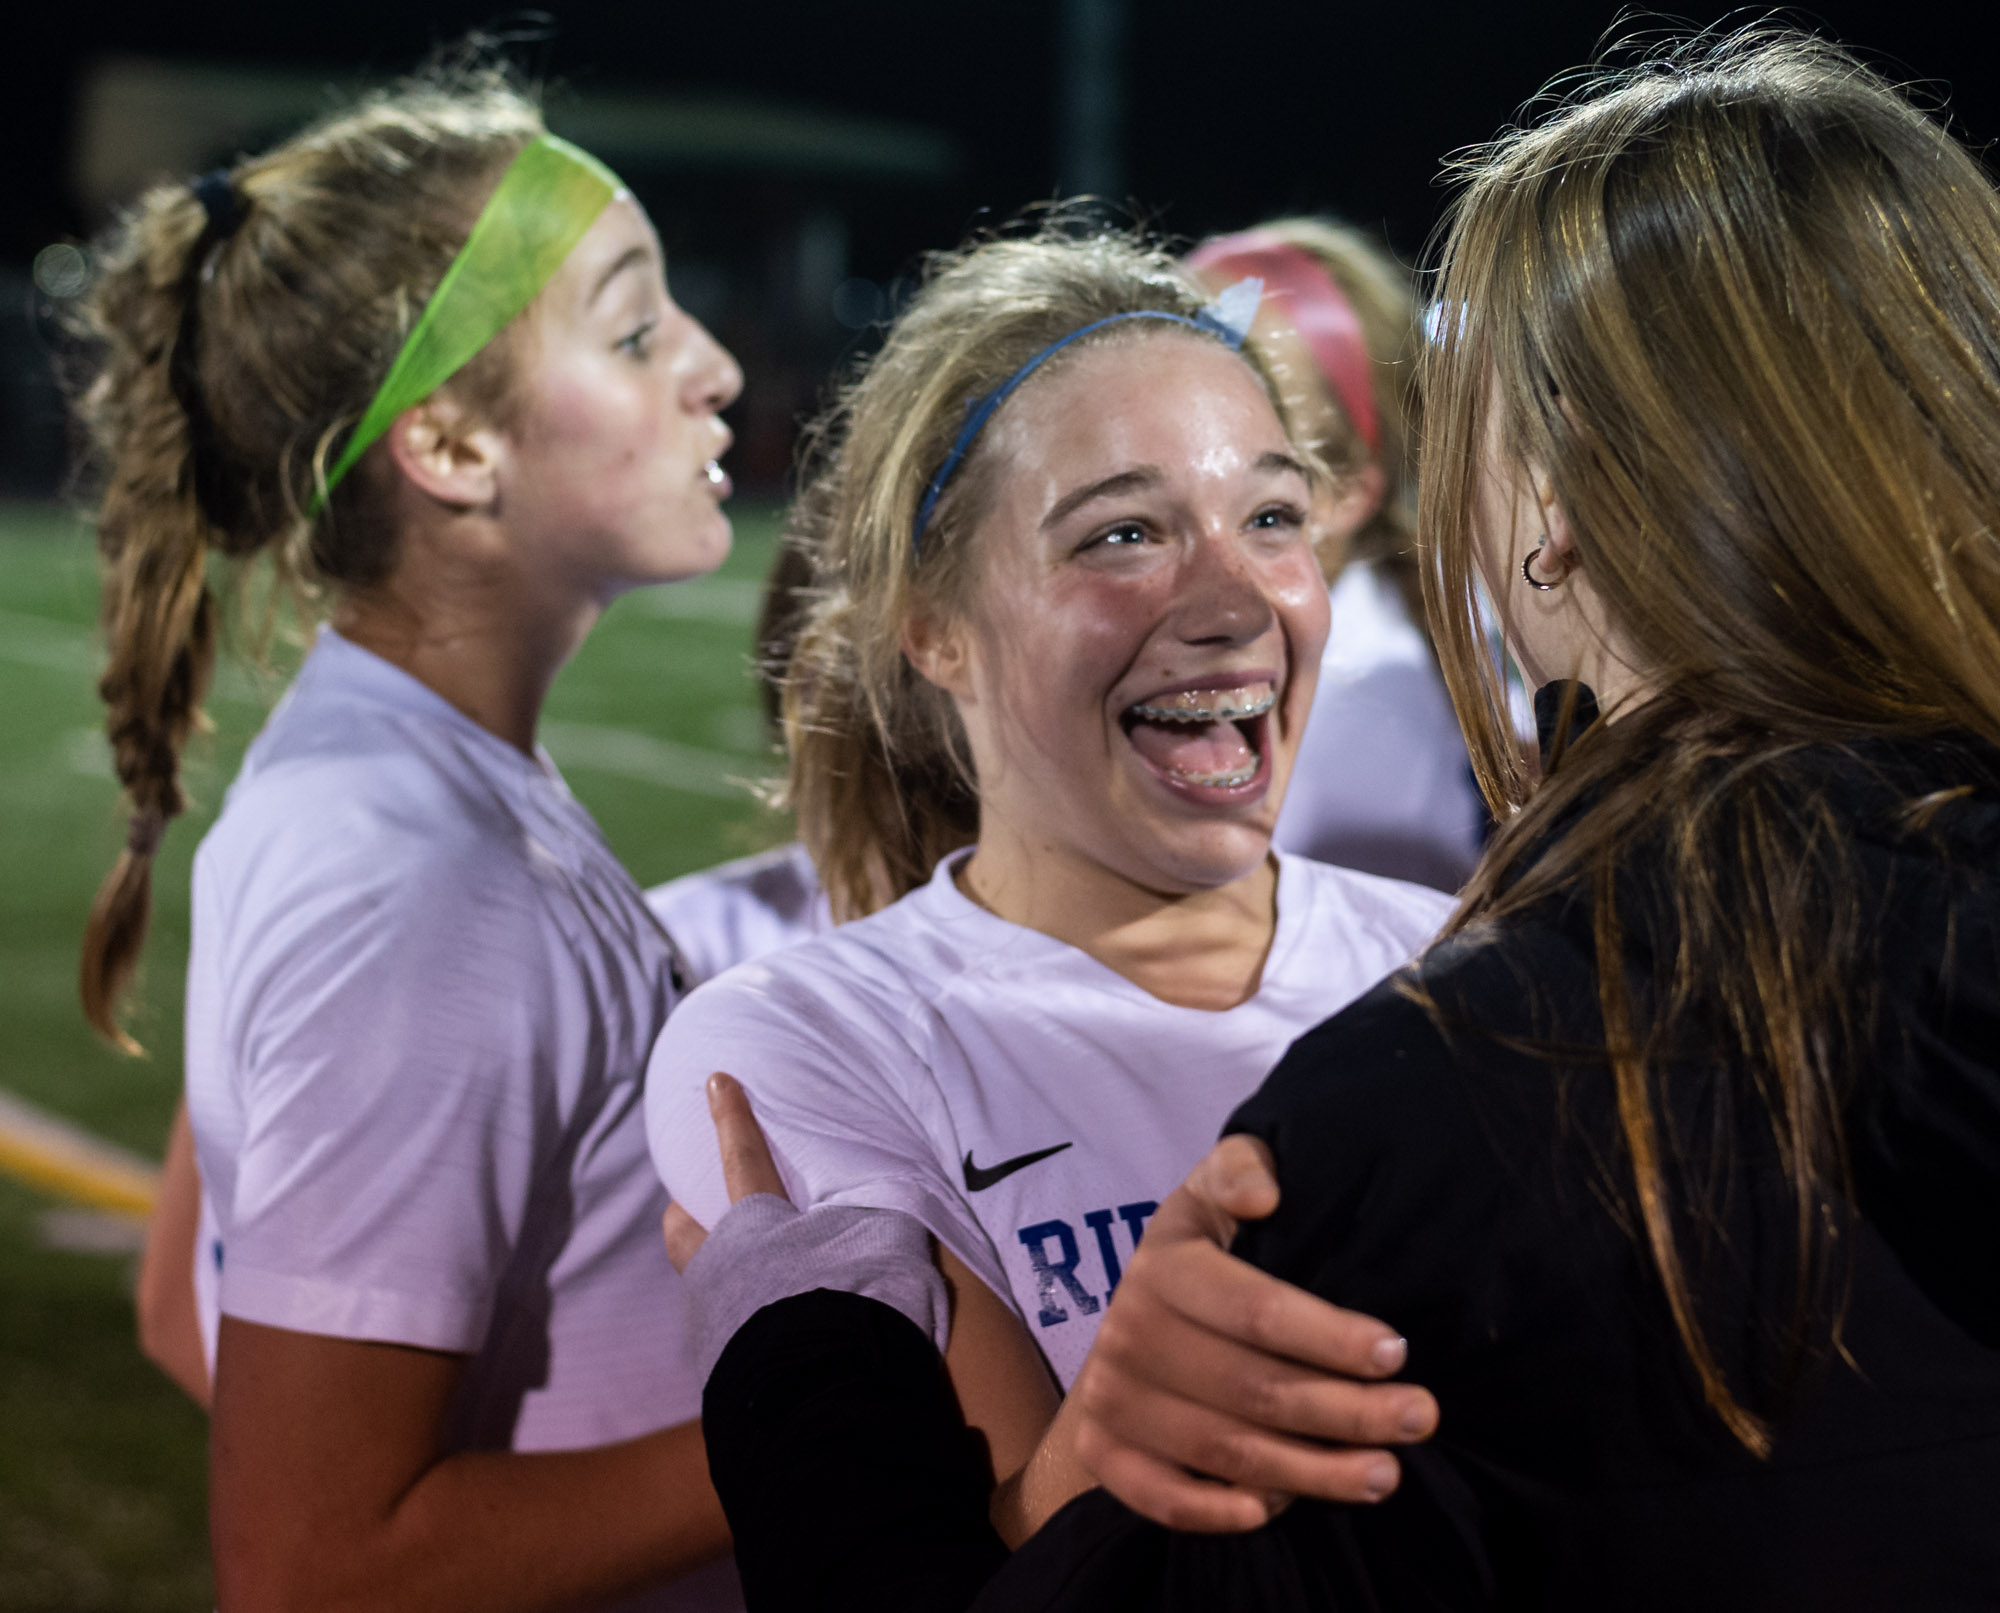 Ridgefield's Ava Kruckenberg hugs a teammate in the 2A District Girls Soccer Championship on Thursday, Nov. 4, 2021, at District Stadium in Battle Ground.